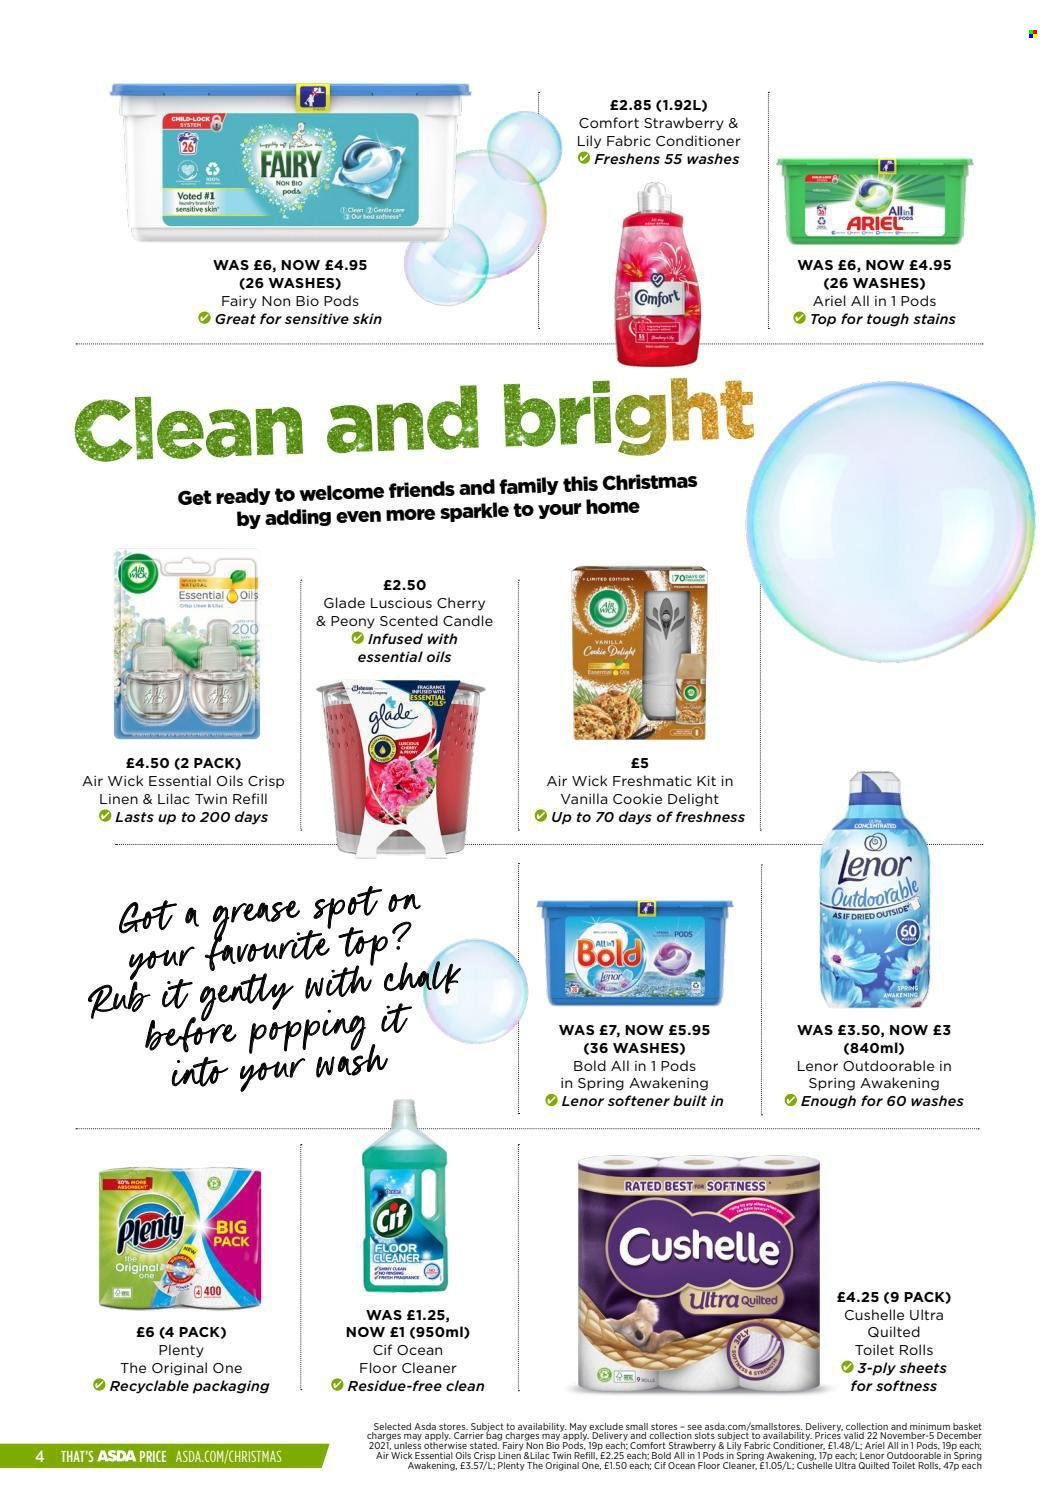 thumbnail - ASDA offer  - 22/11/2021 - 05/12/2021 - Sales products - cherries, toilet paper, Plenty, Cushelle, cleaner, floor cleaner, Fairy, Cif, fabric softener, Ariel, Lenor, Bold detergent, bag, basket, candle, Air Wick, Glade, essential oils, linens. Page 4.